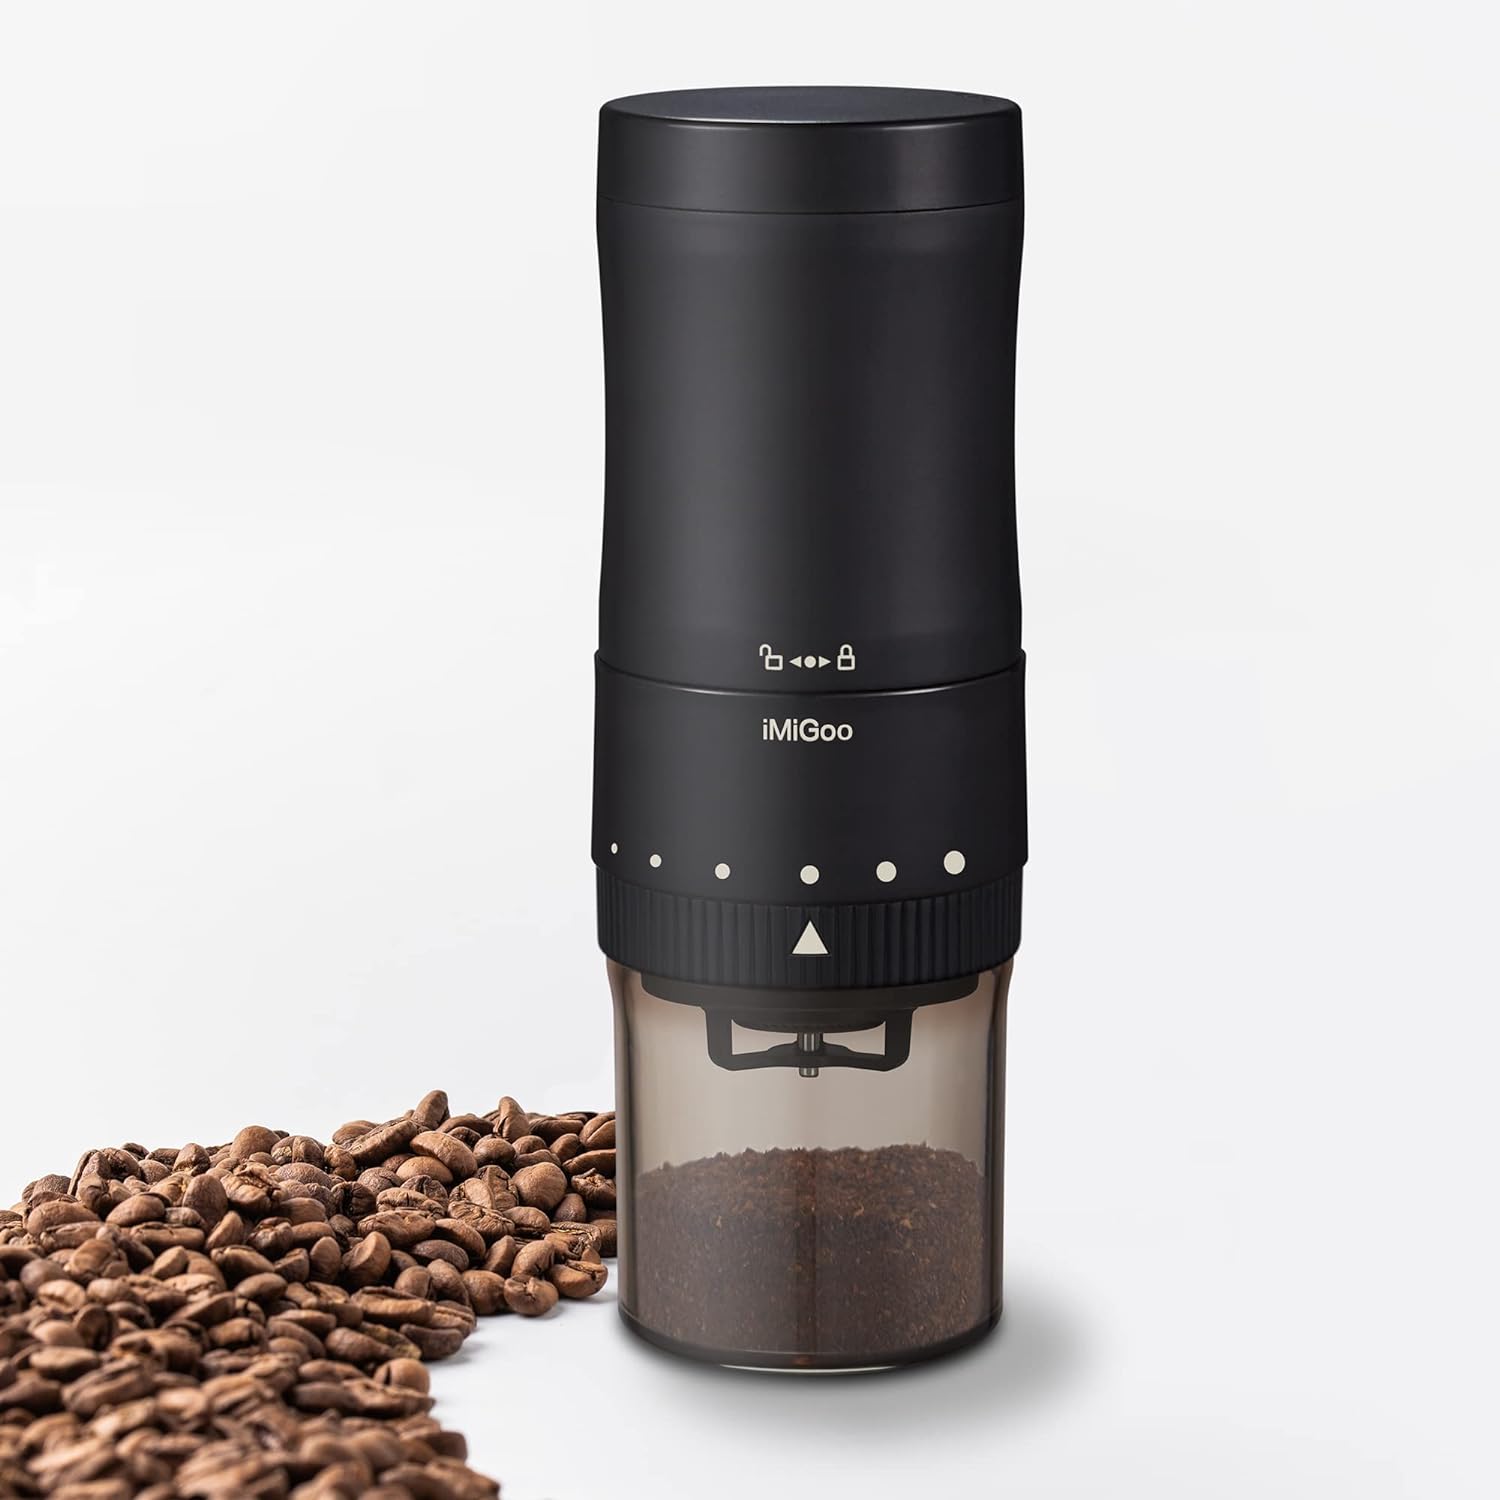 Conical Ceramic Burr Coffee Grinder - Electric Slow Grinder As Manual, with Adapter, Upgraded Grinding Bin - for Espresso, Pour Over, Drip, Percolator, Chemex, Cold Brew, French Press